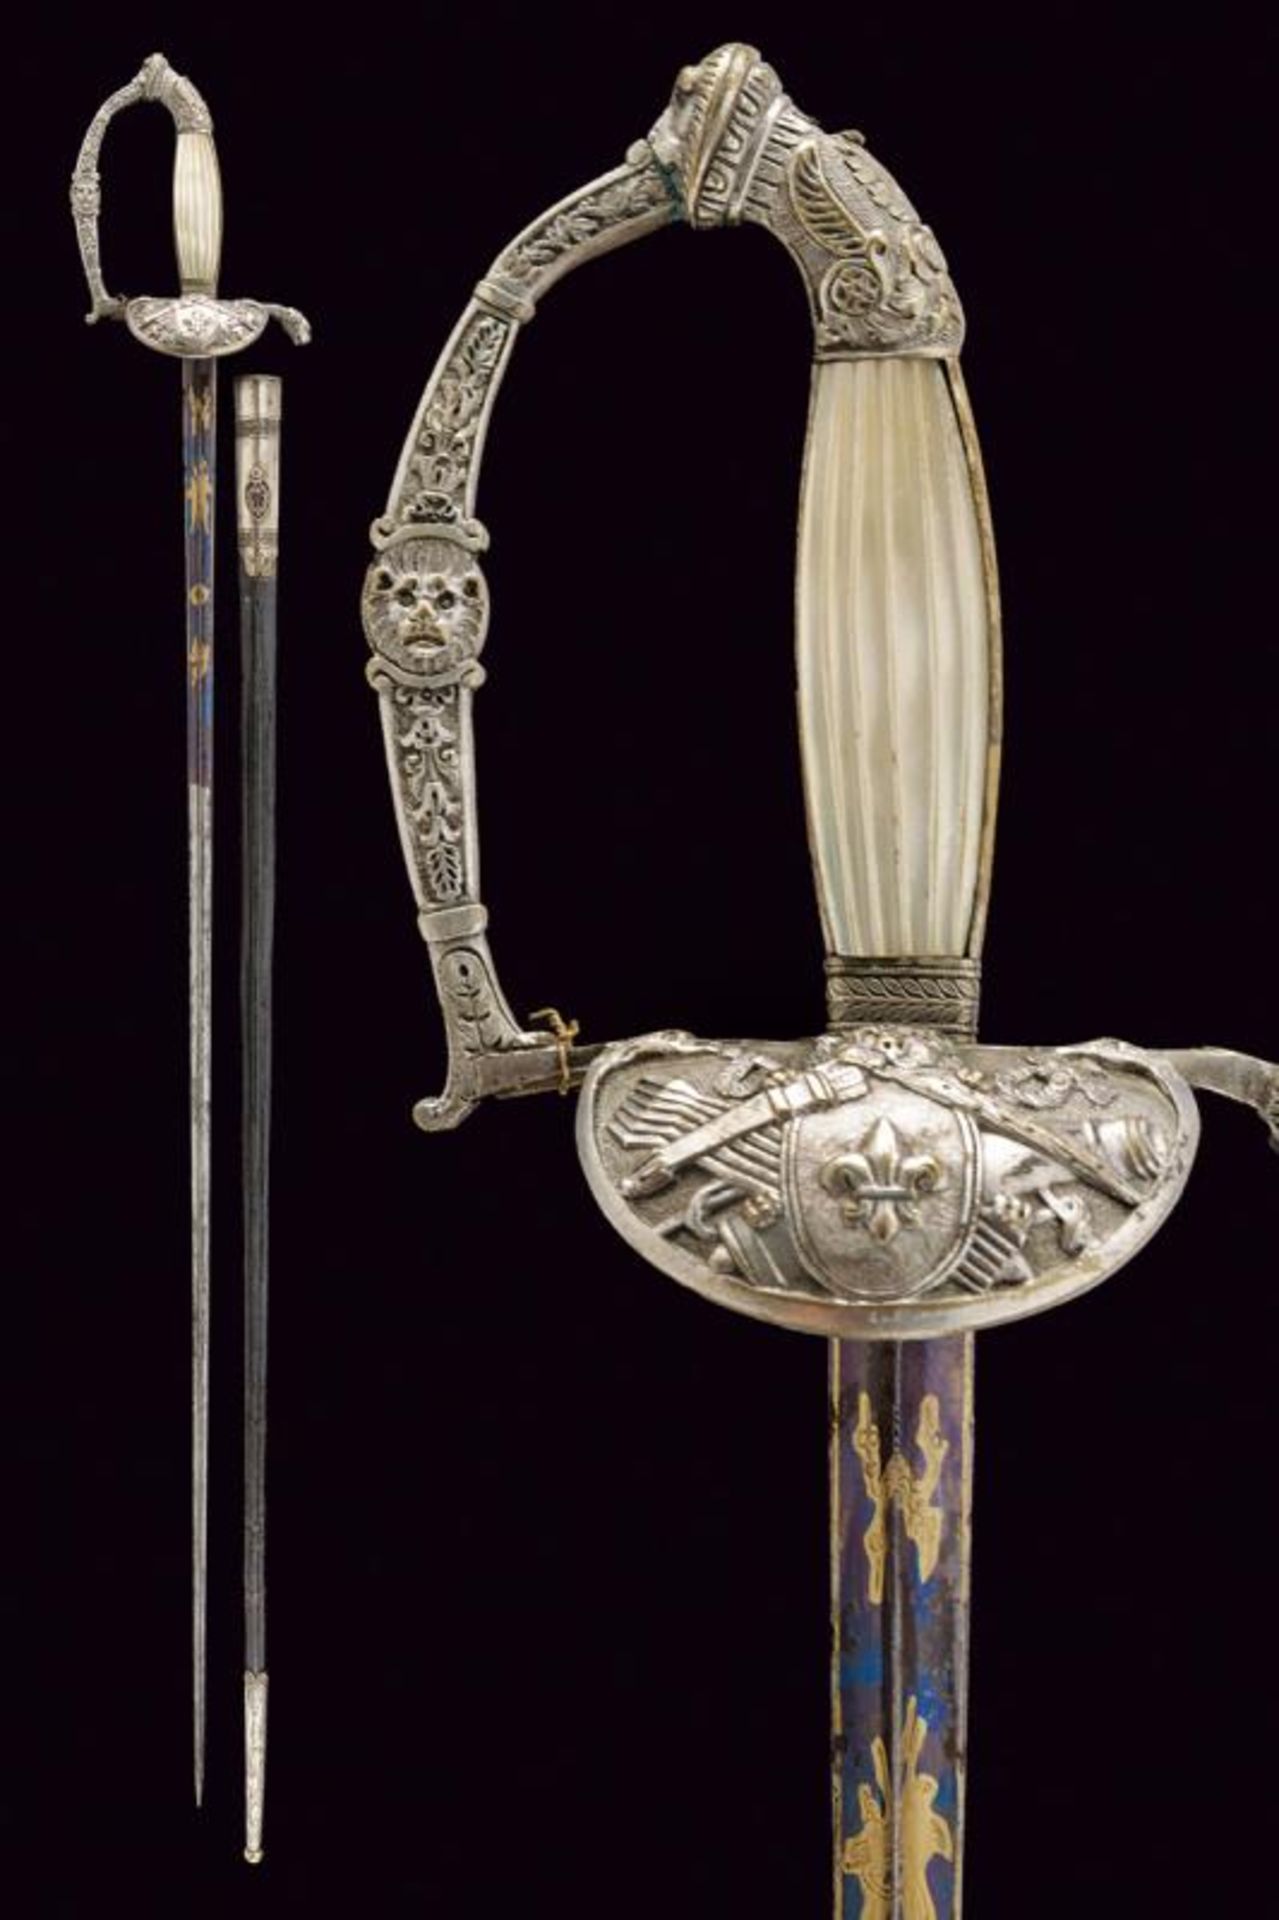 A court official's smallsword